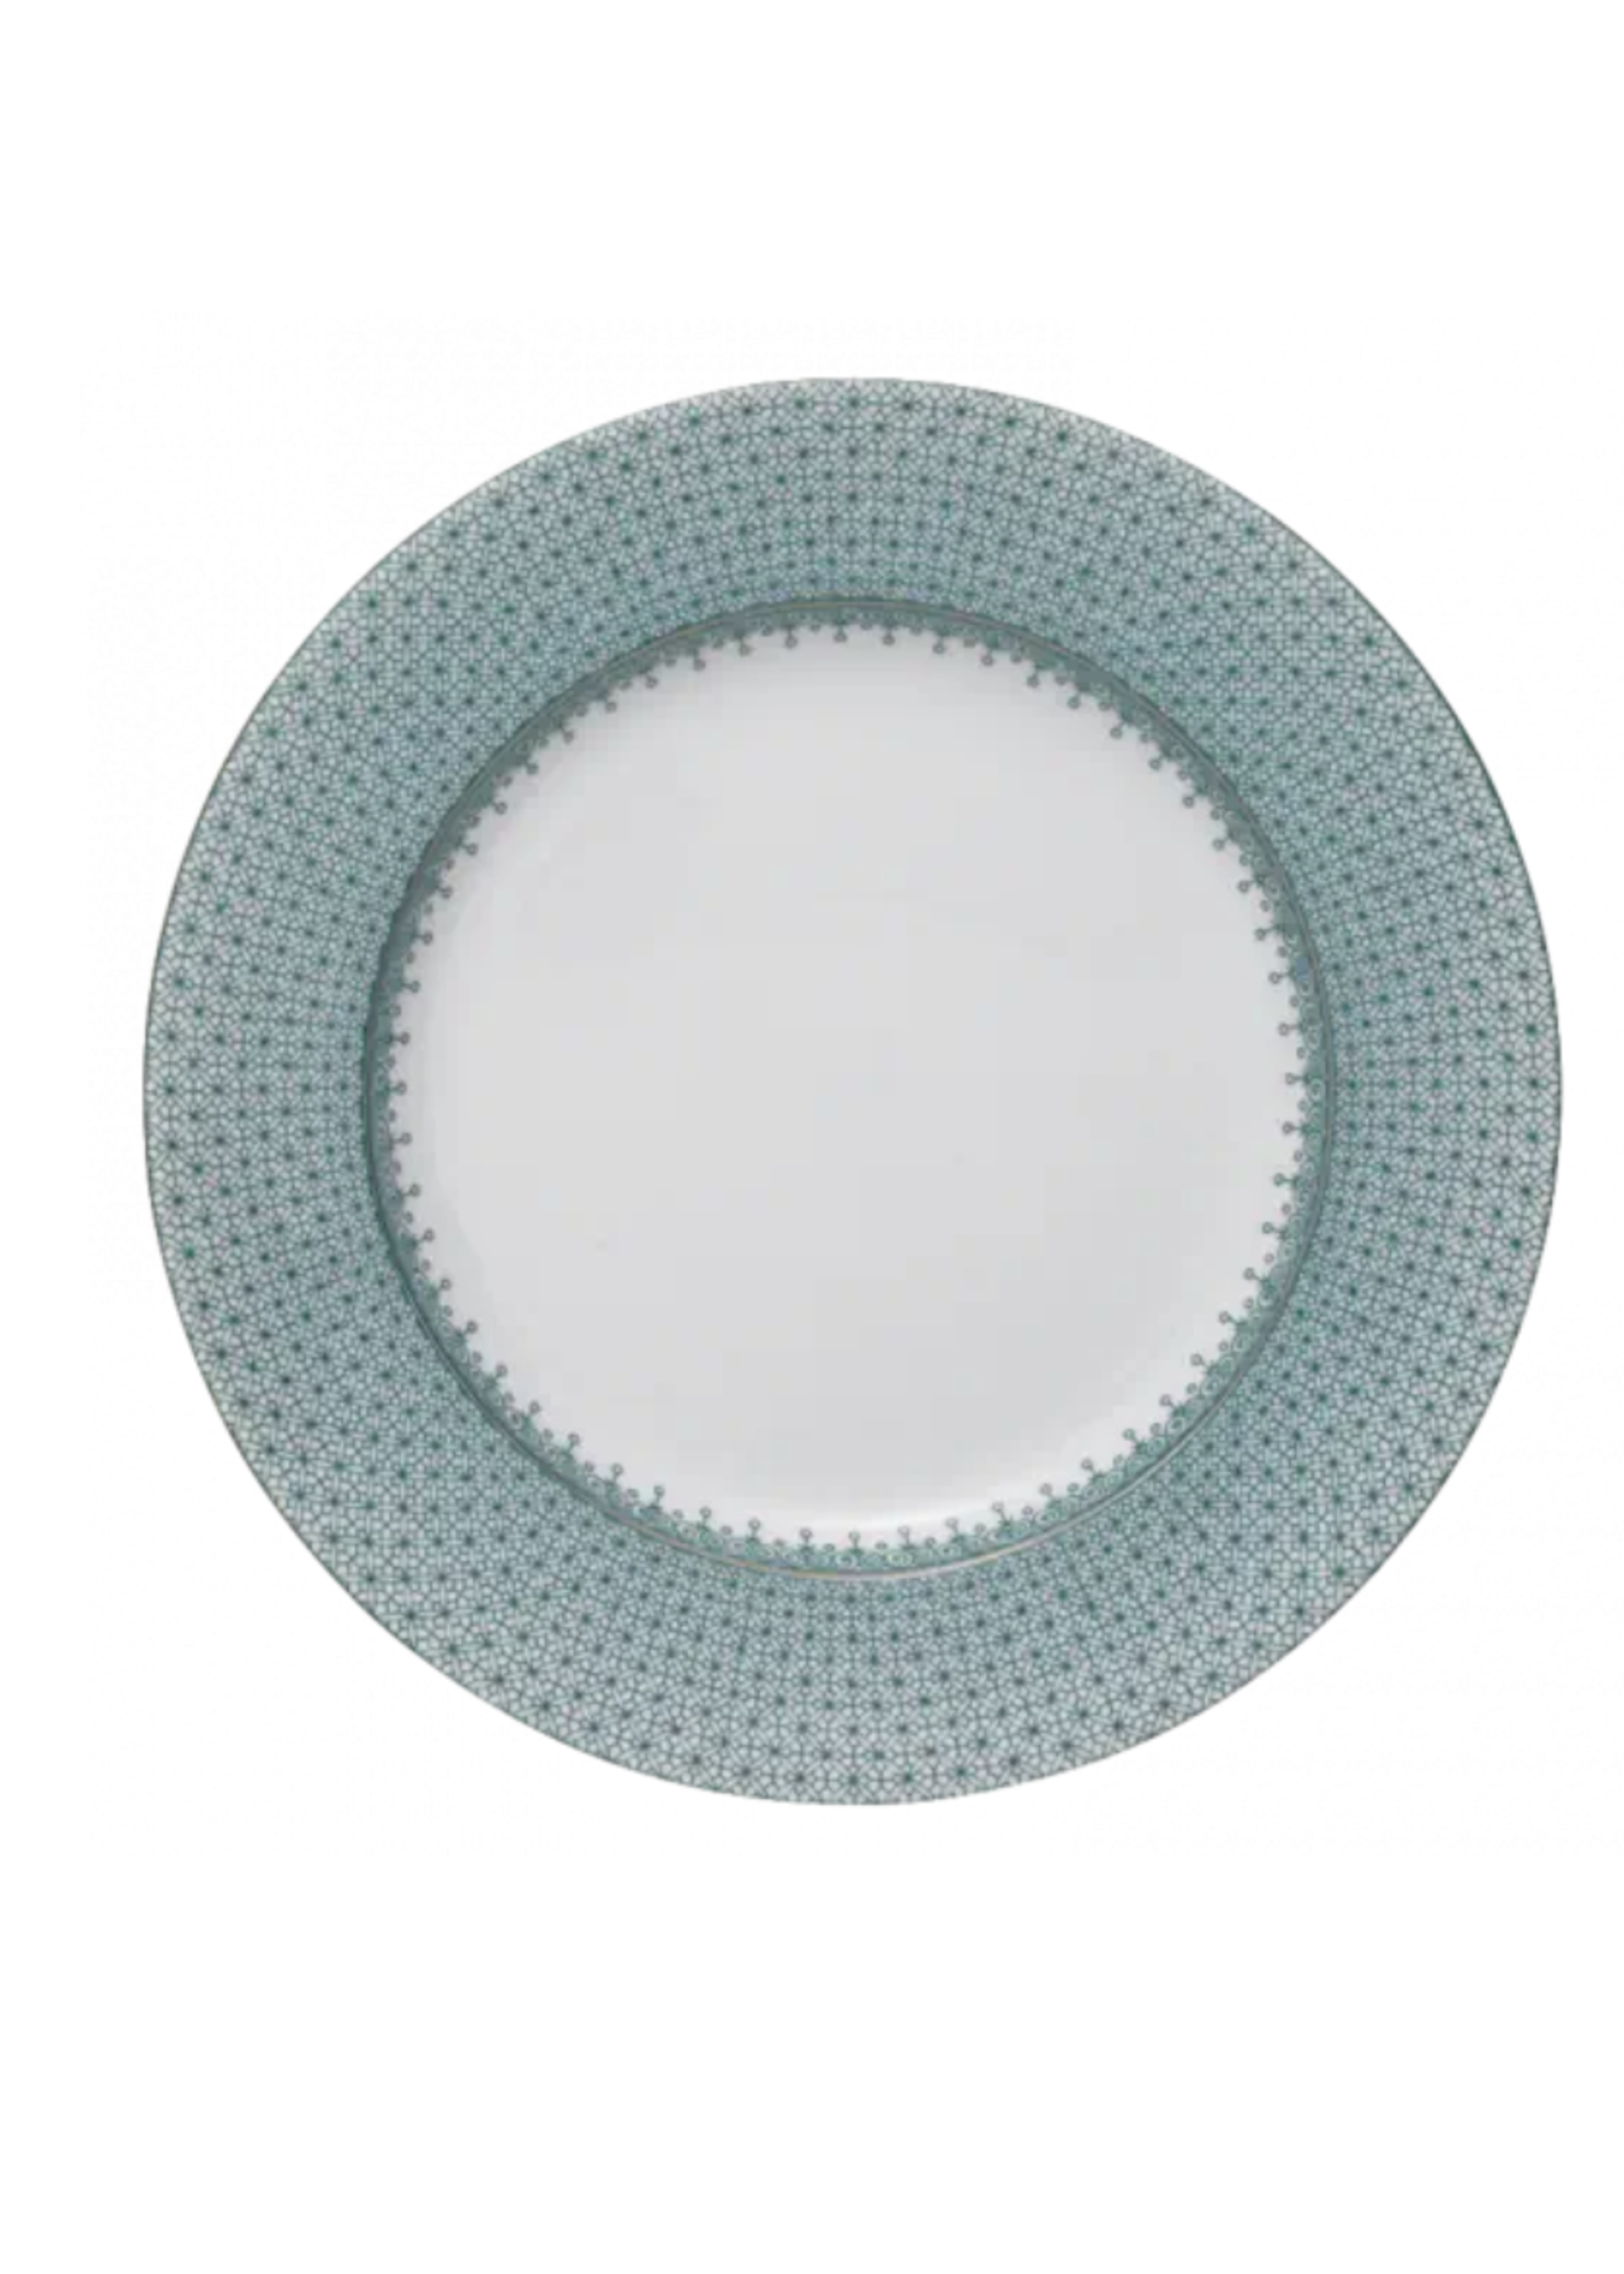 Mottahedeh Green Lace Dinner Plate